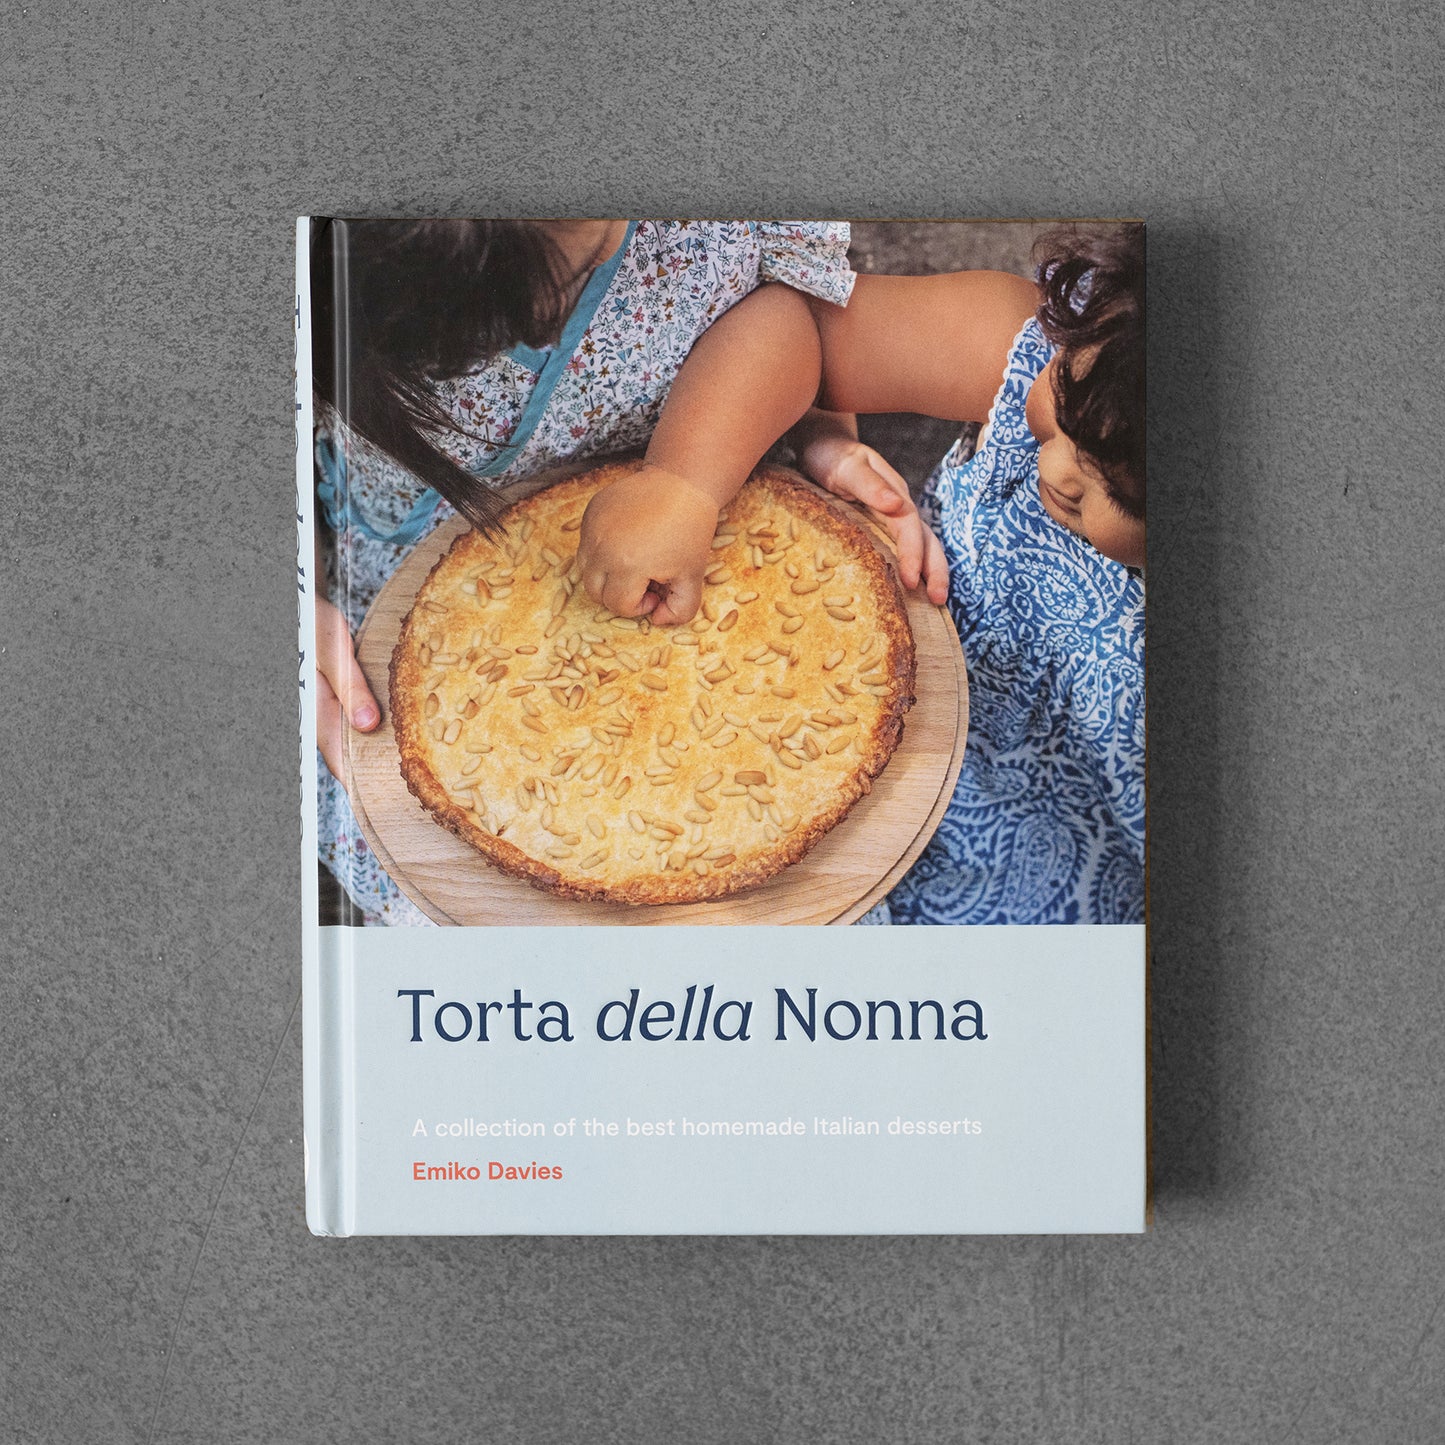 Torta della Nonna: A Collection of the Best Homemade Italian Sweets